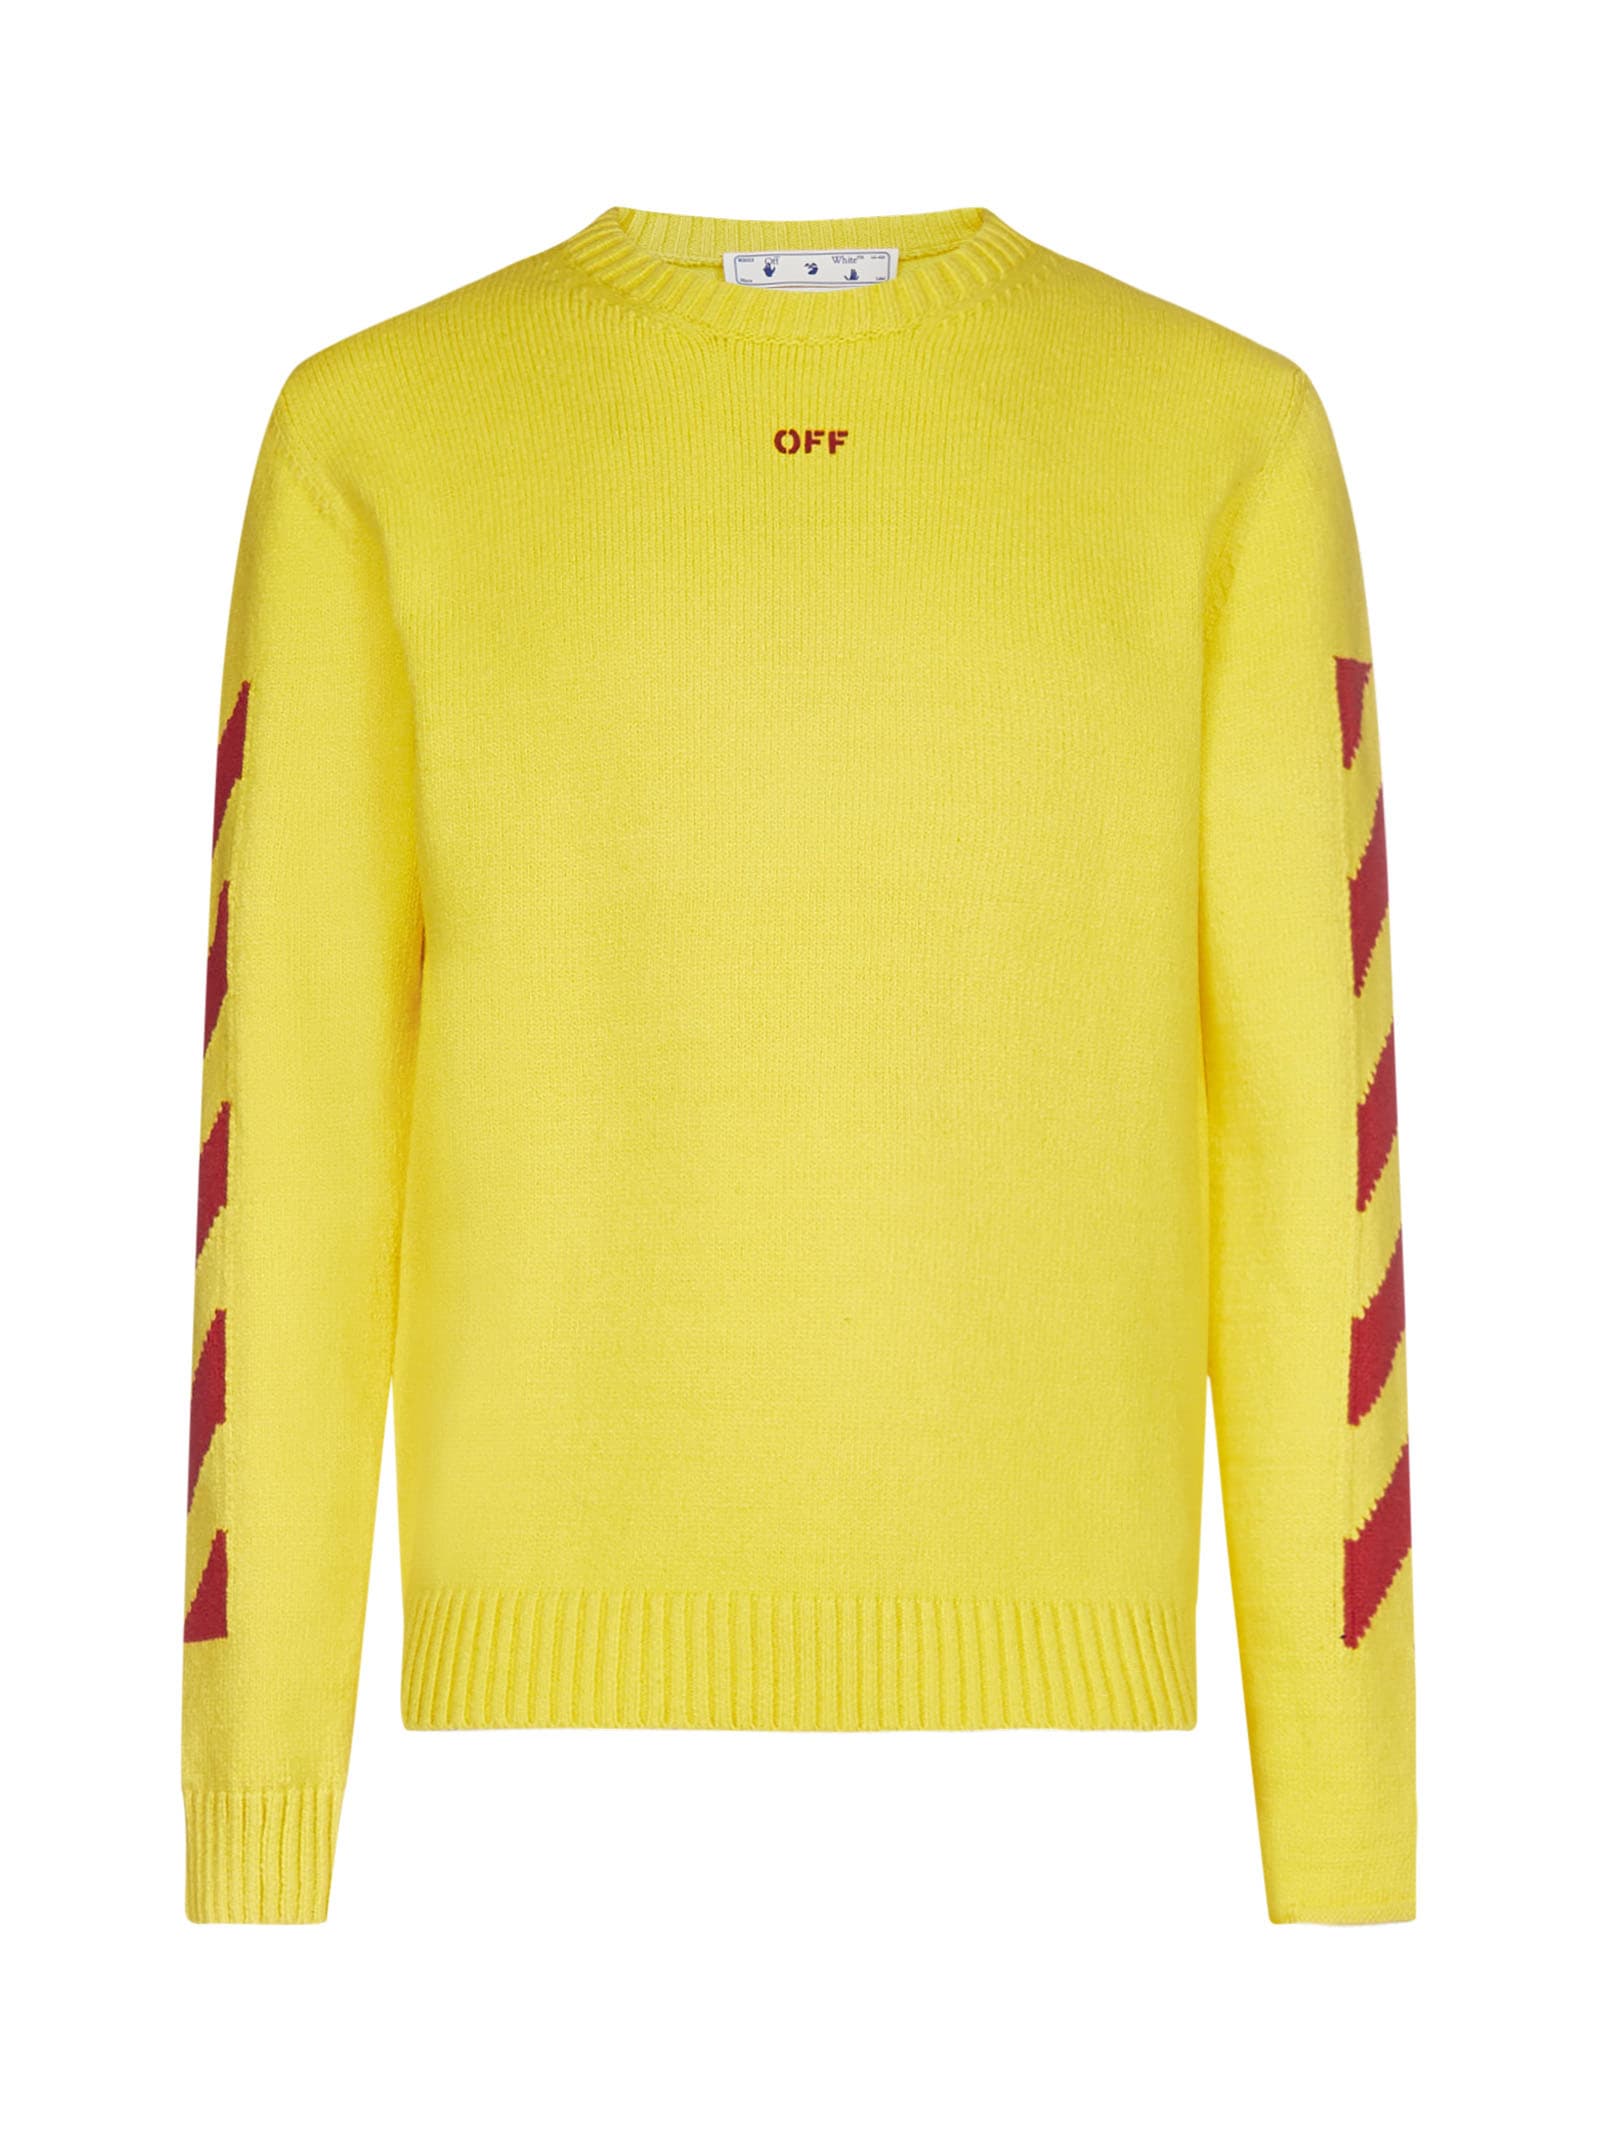 OFF-WHITE SWEATER,OMHE023S21KNI001 -1925